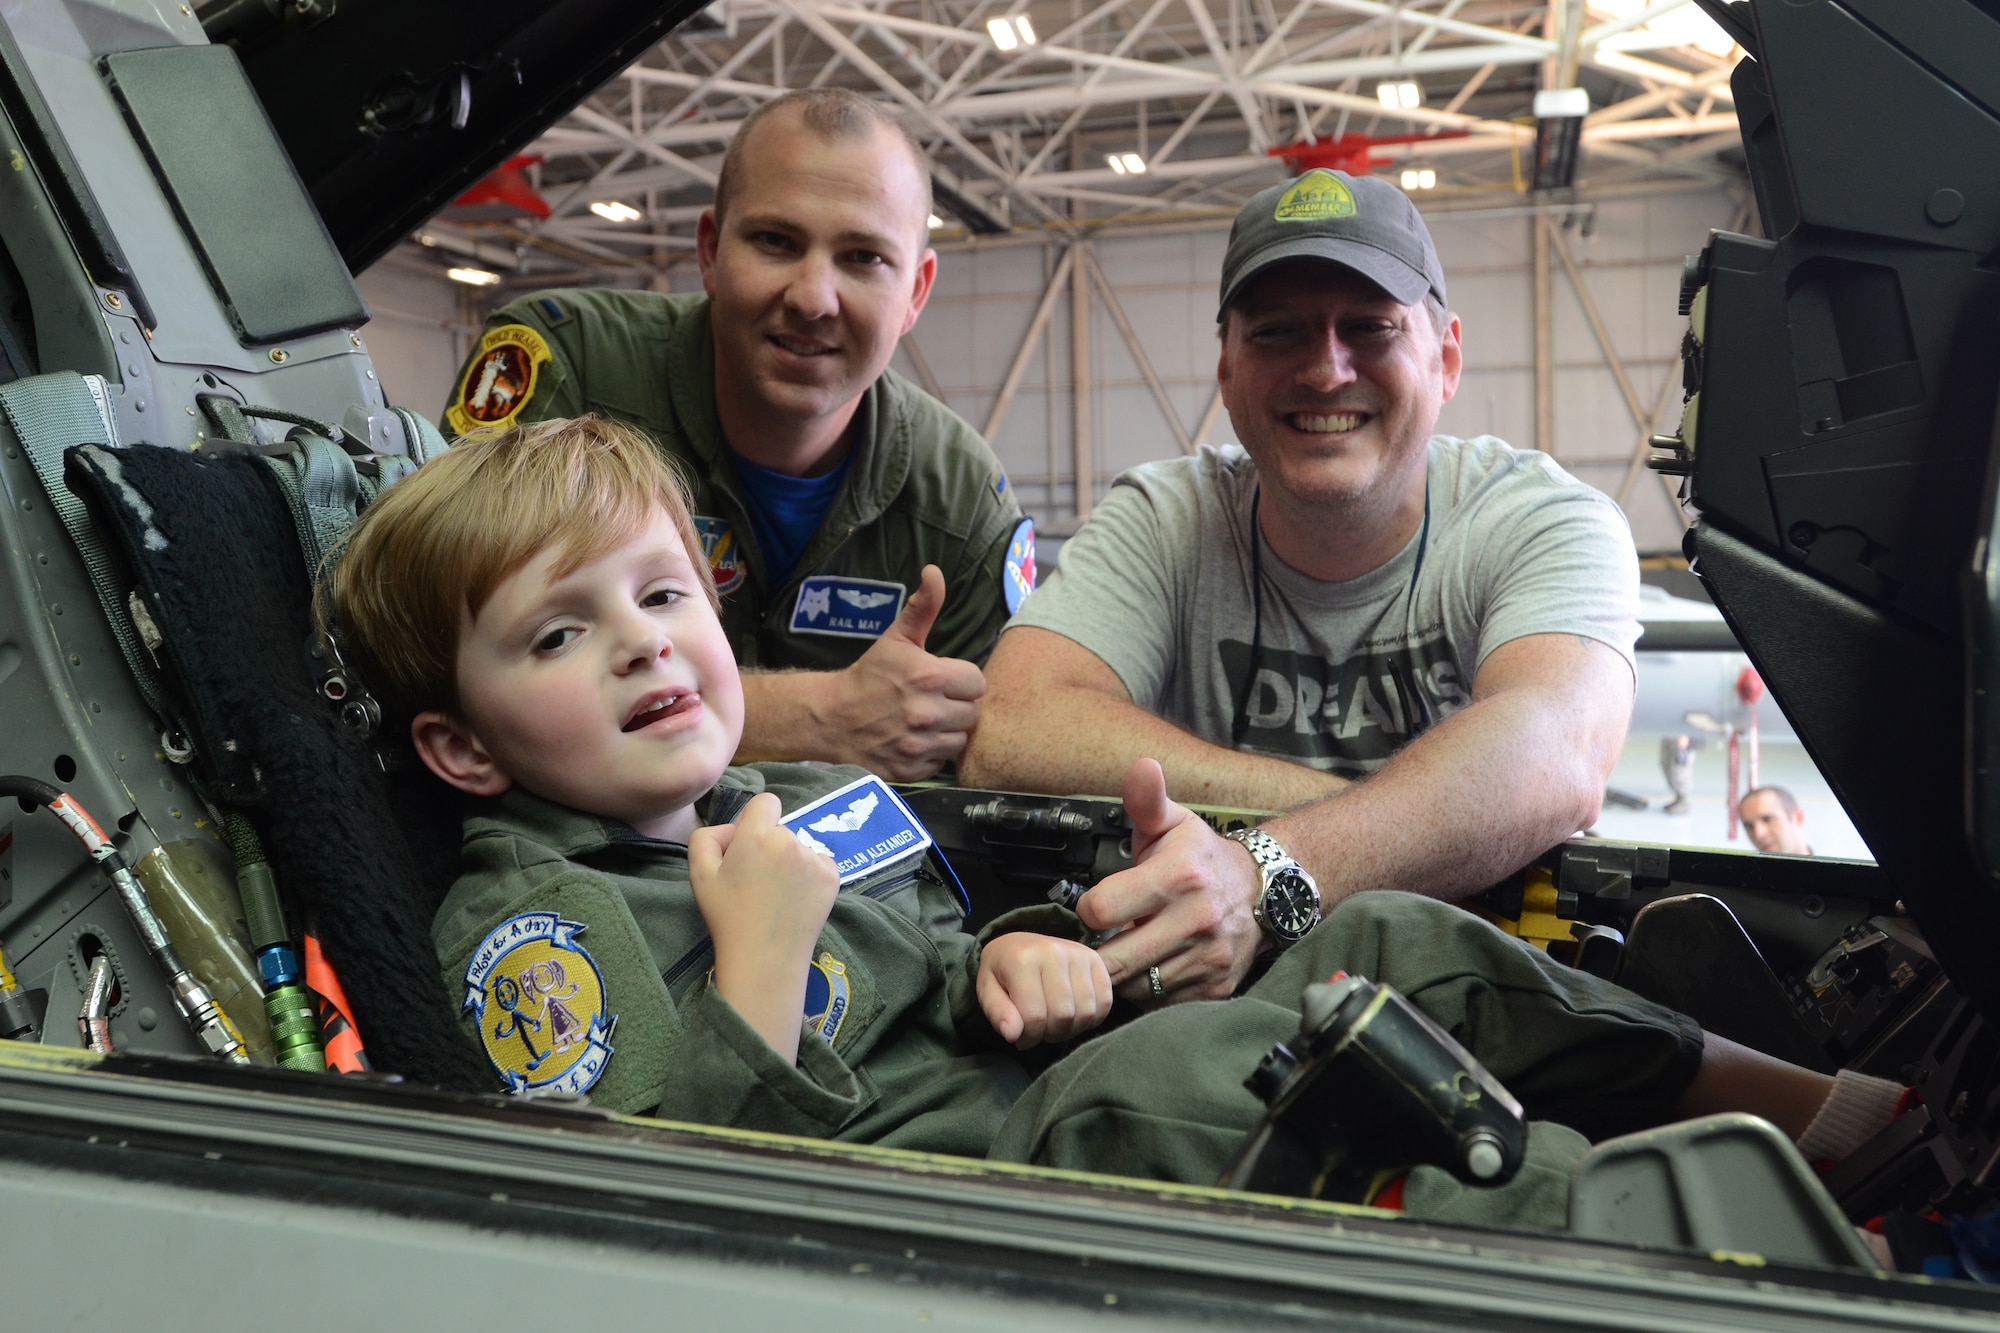 Declan Alexander sits in an F-16 Fighting Falcon at McEntire Joint National Guard Base, Eastover, S.C., as the Swamp Fox “Pilot for a Day”, Aug. 15, 2015. Declan spent the day with U.S. Air Force 1st Lt. Cody "Rail" May, a fighter pilot with the 157th Fighter Squadron, and watched F-16 fighter jets land, toured aircrew flight equipment, sat in the cockpit of an F-16, and took a ride in a fire truck. The Pilot for a Day program is an opportunity for disadvantaged or seriously ill children to spend a day with members of the South Carolina Air National Guard. (S.C. Air National Guard photo by Airman 1st Class Ashleigh Pavelek/Released)